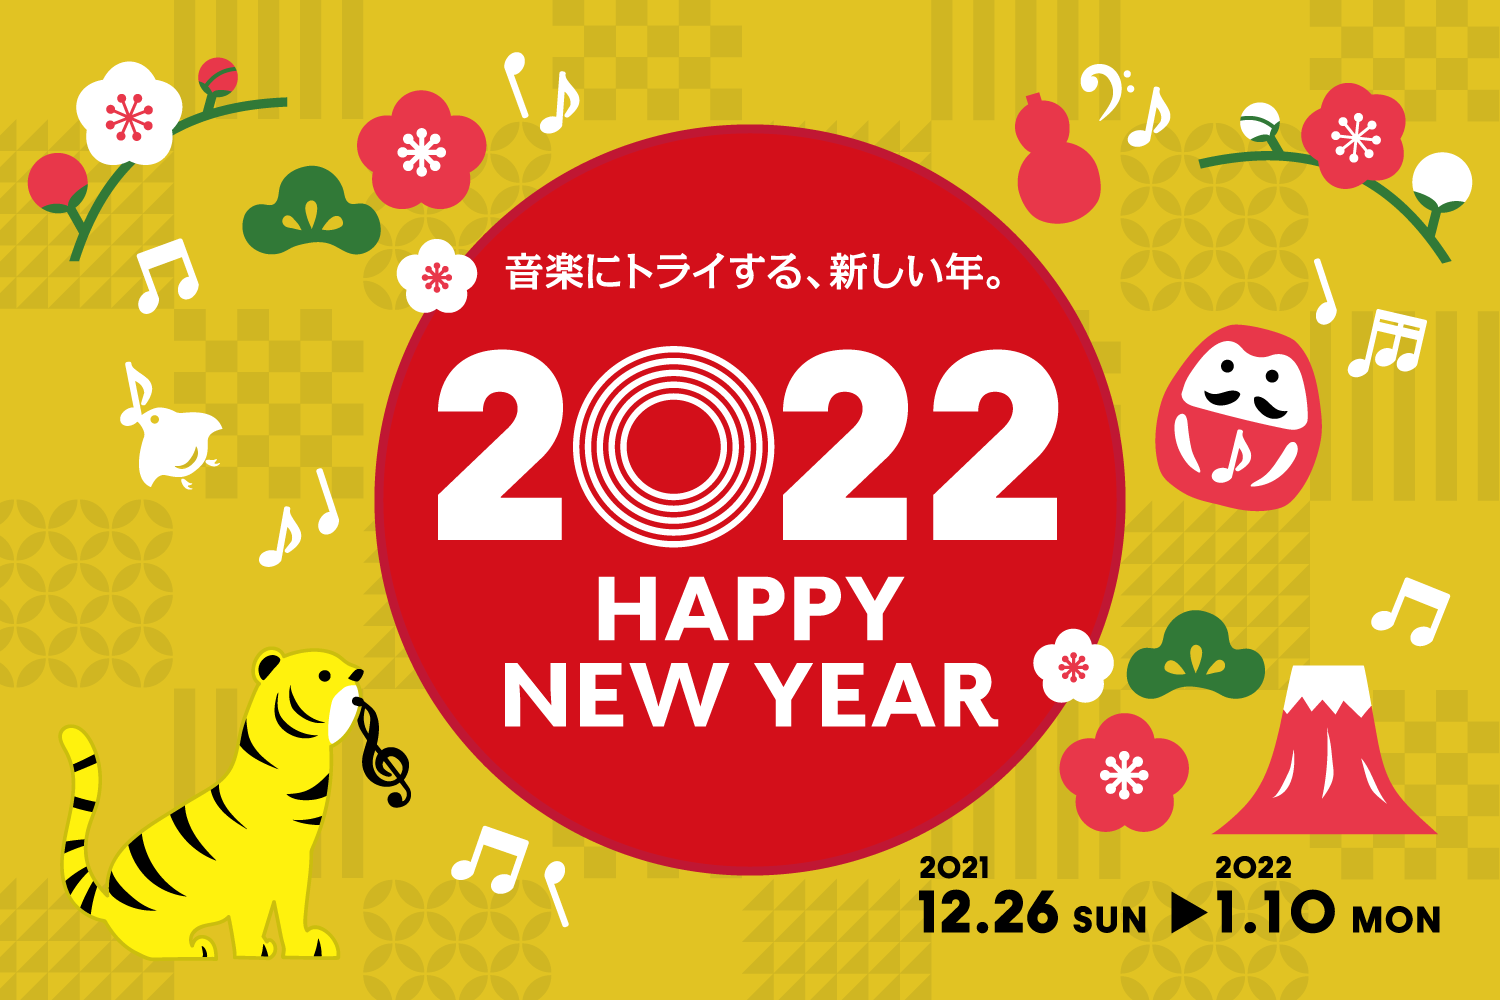 【HAPPY NEW YEAR 2022】年末年始限定！おトクな福袋のご案内！